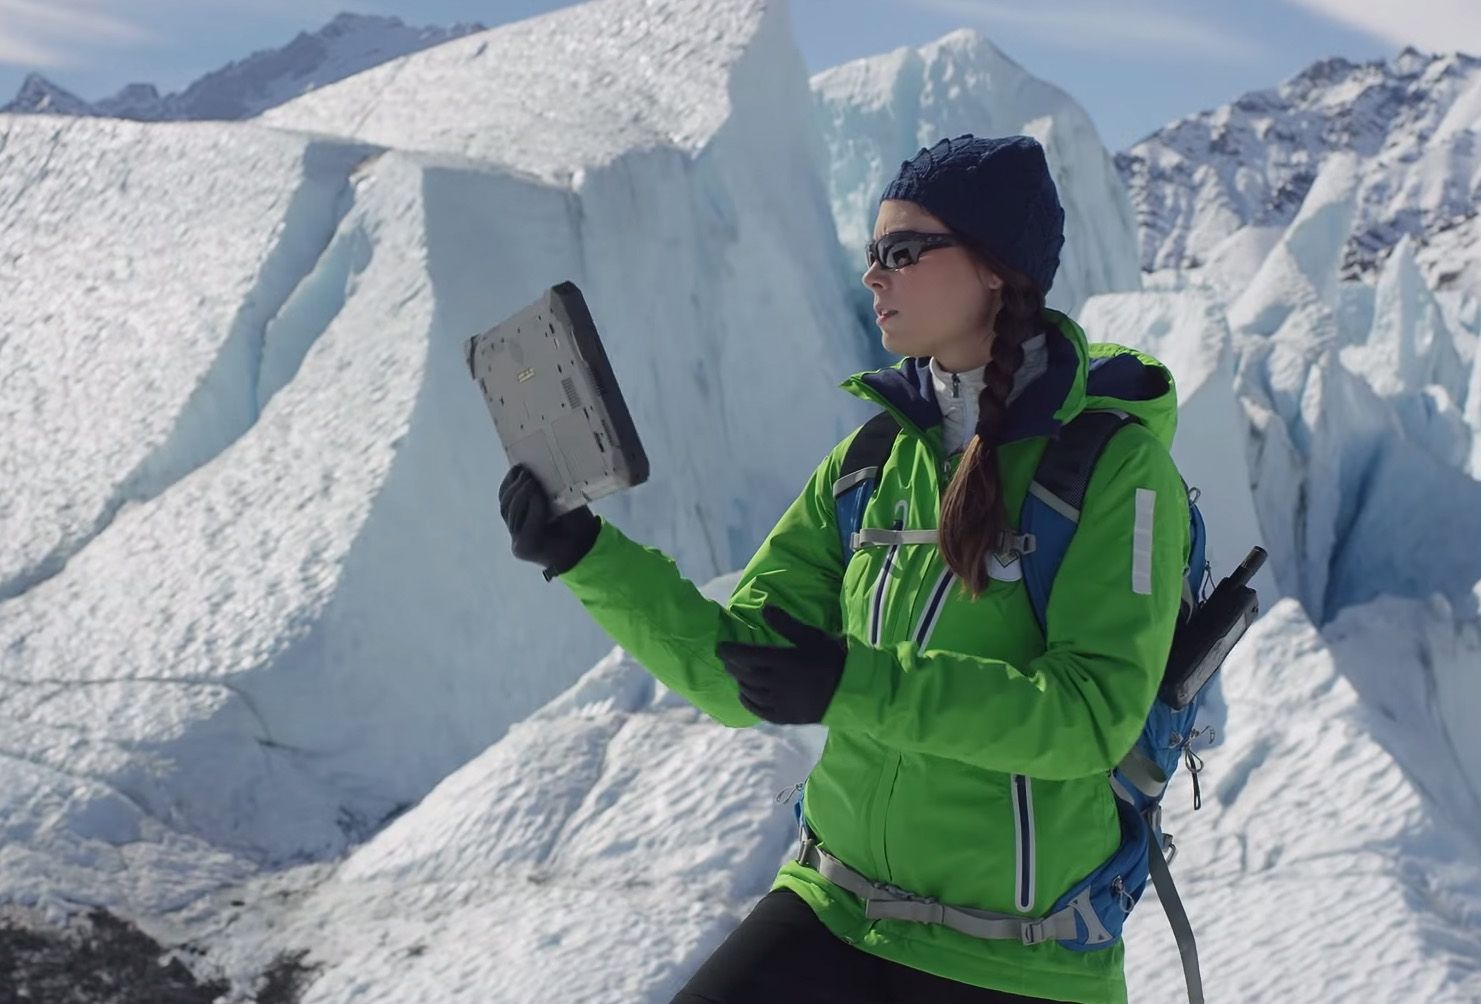 dell latitude 12 rugged tablet can survive insane conditions image 1